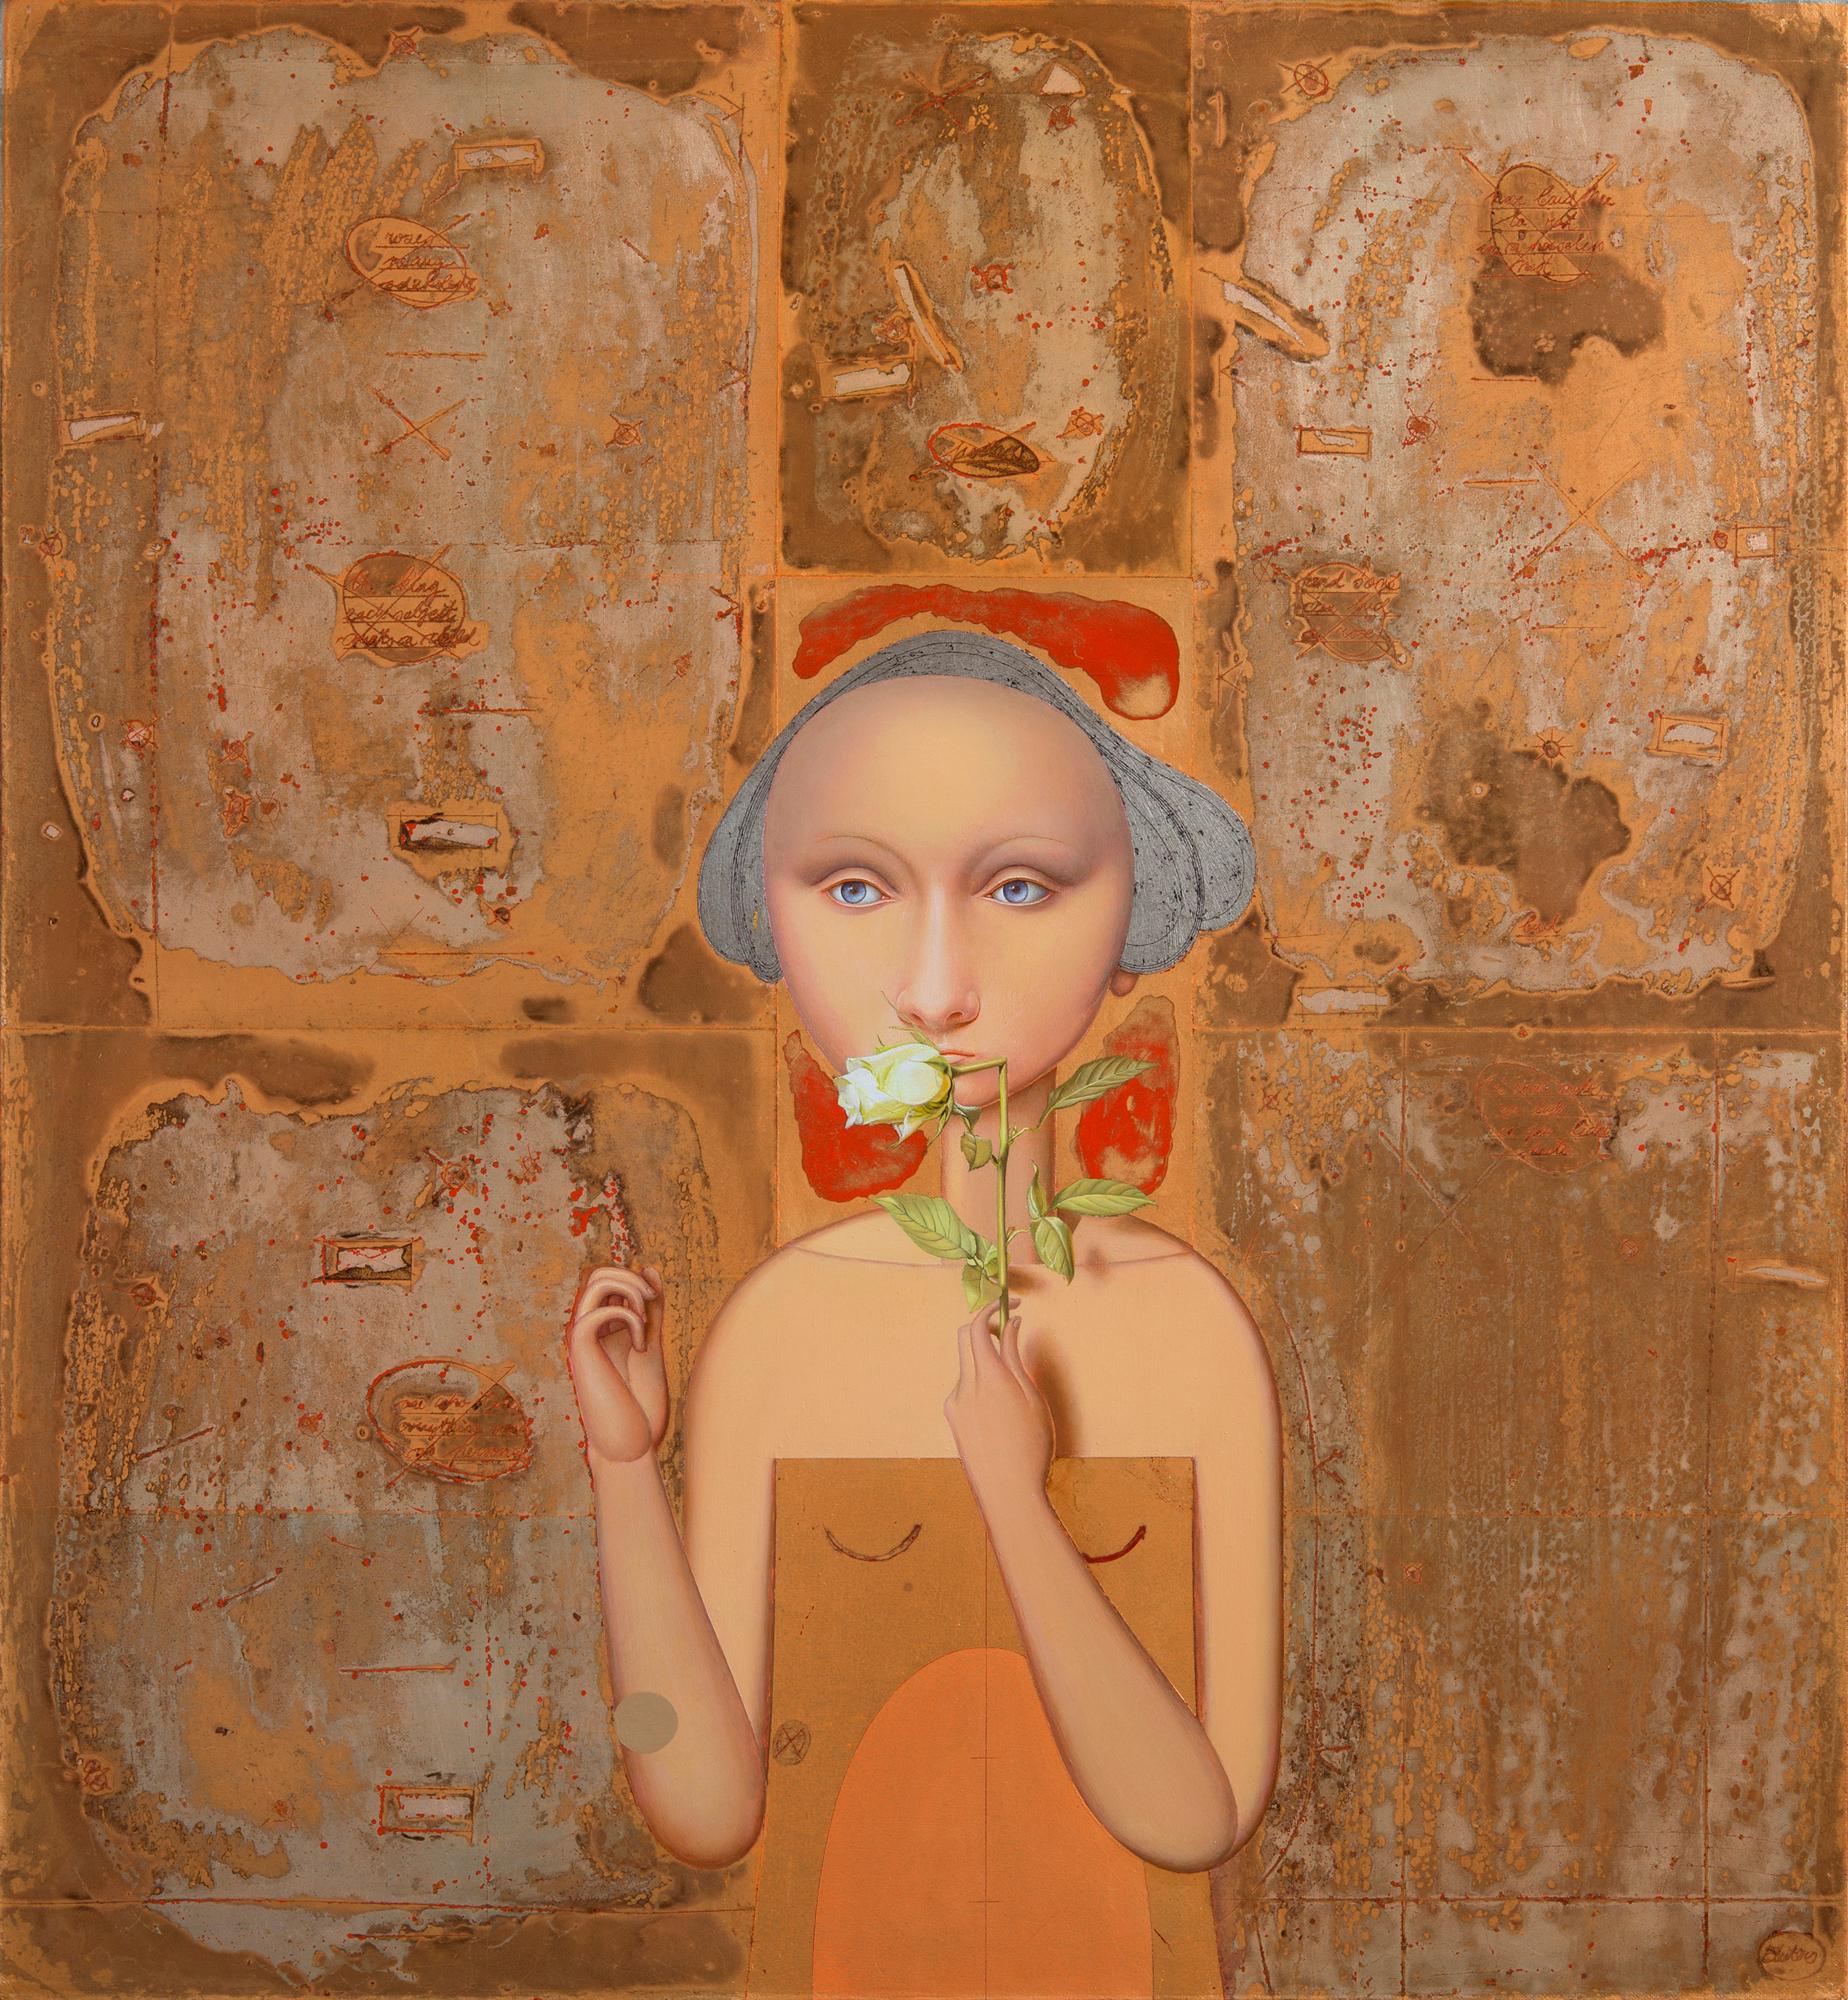 Kalvis Zuters Figurative Painting - Poetess Mixed Media Technique on Canvas Poetry White Rose Gold In Stock